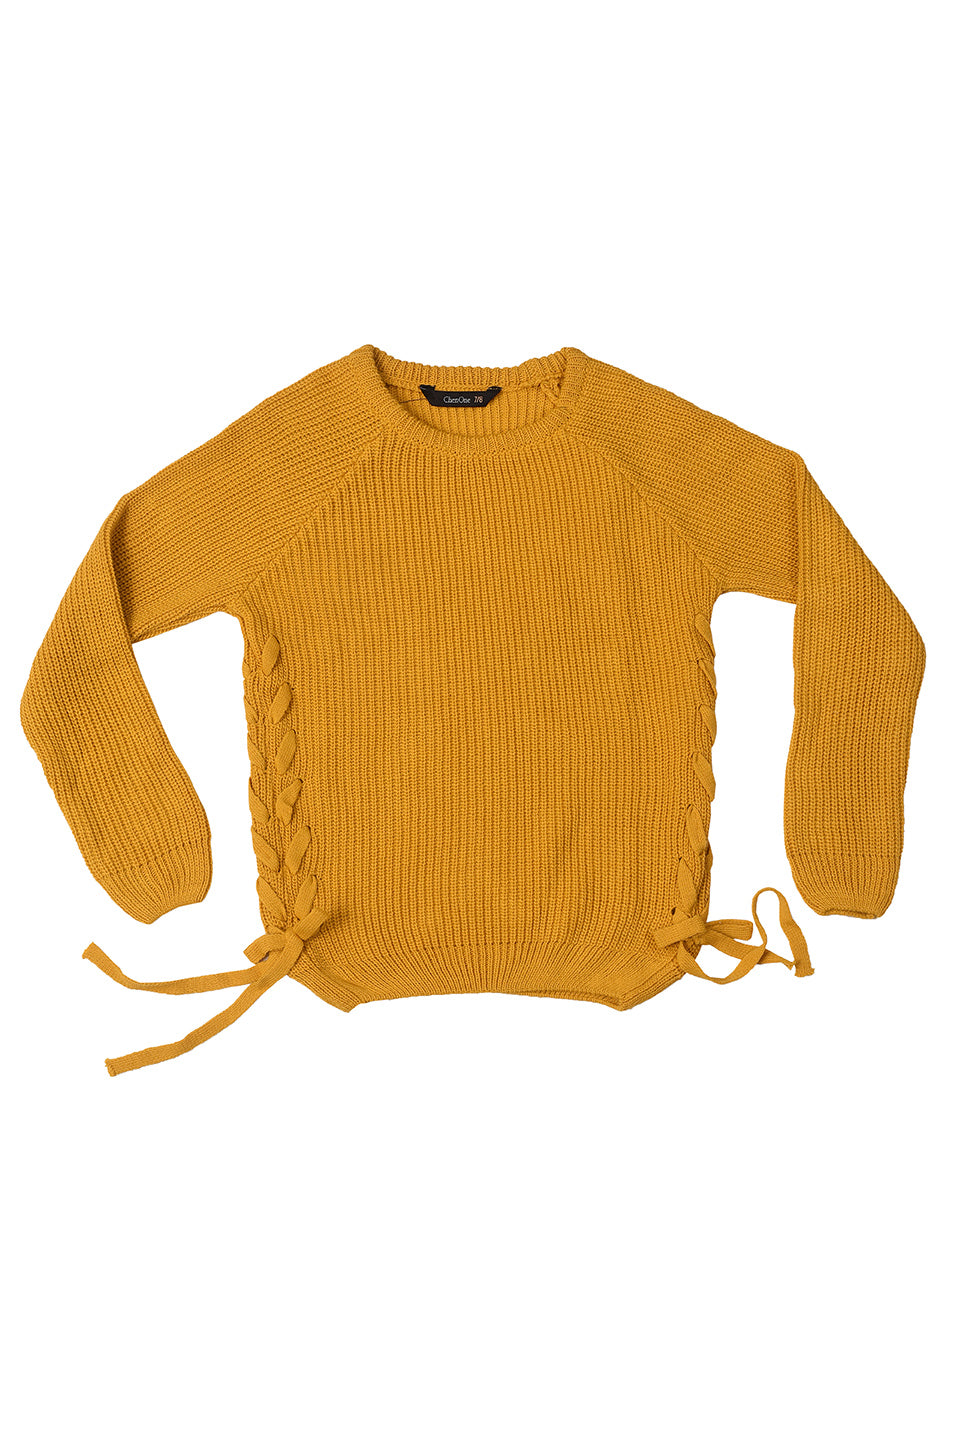 KDS-GC-12575 SWEATER F/SLV YELLOW